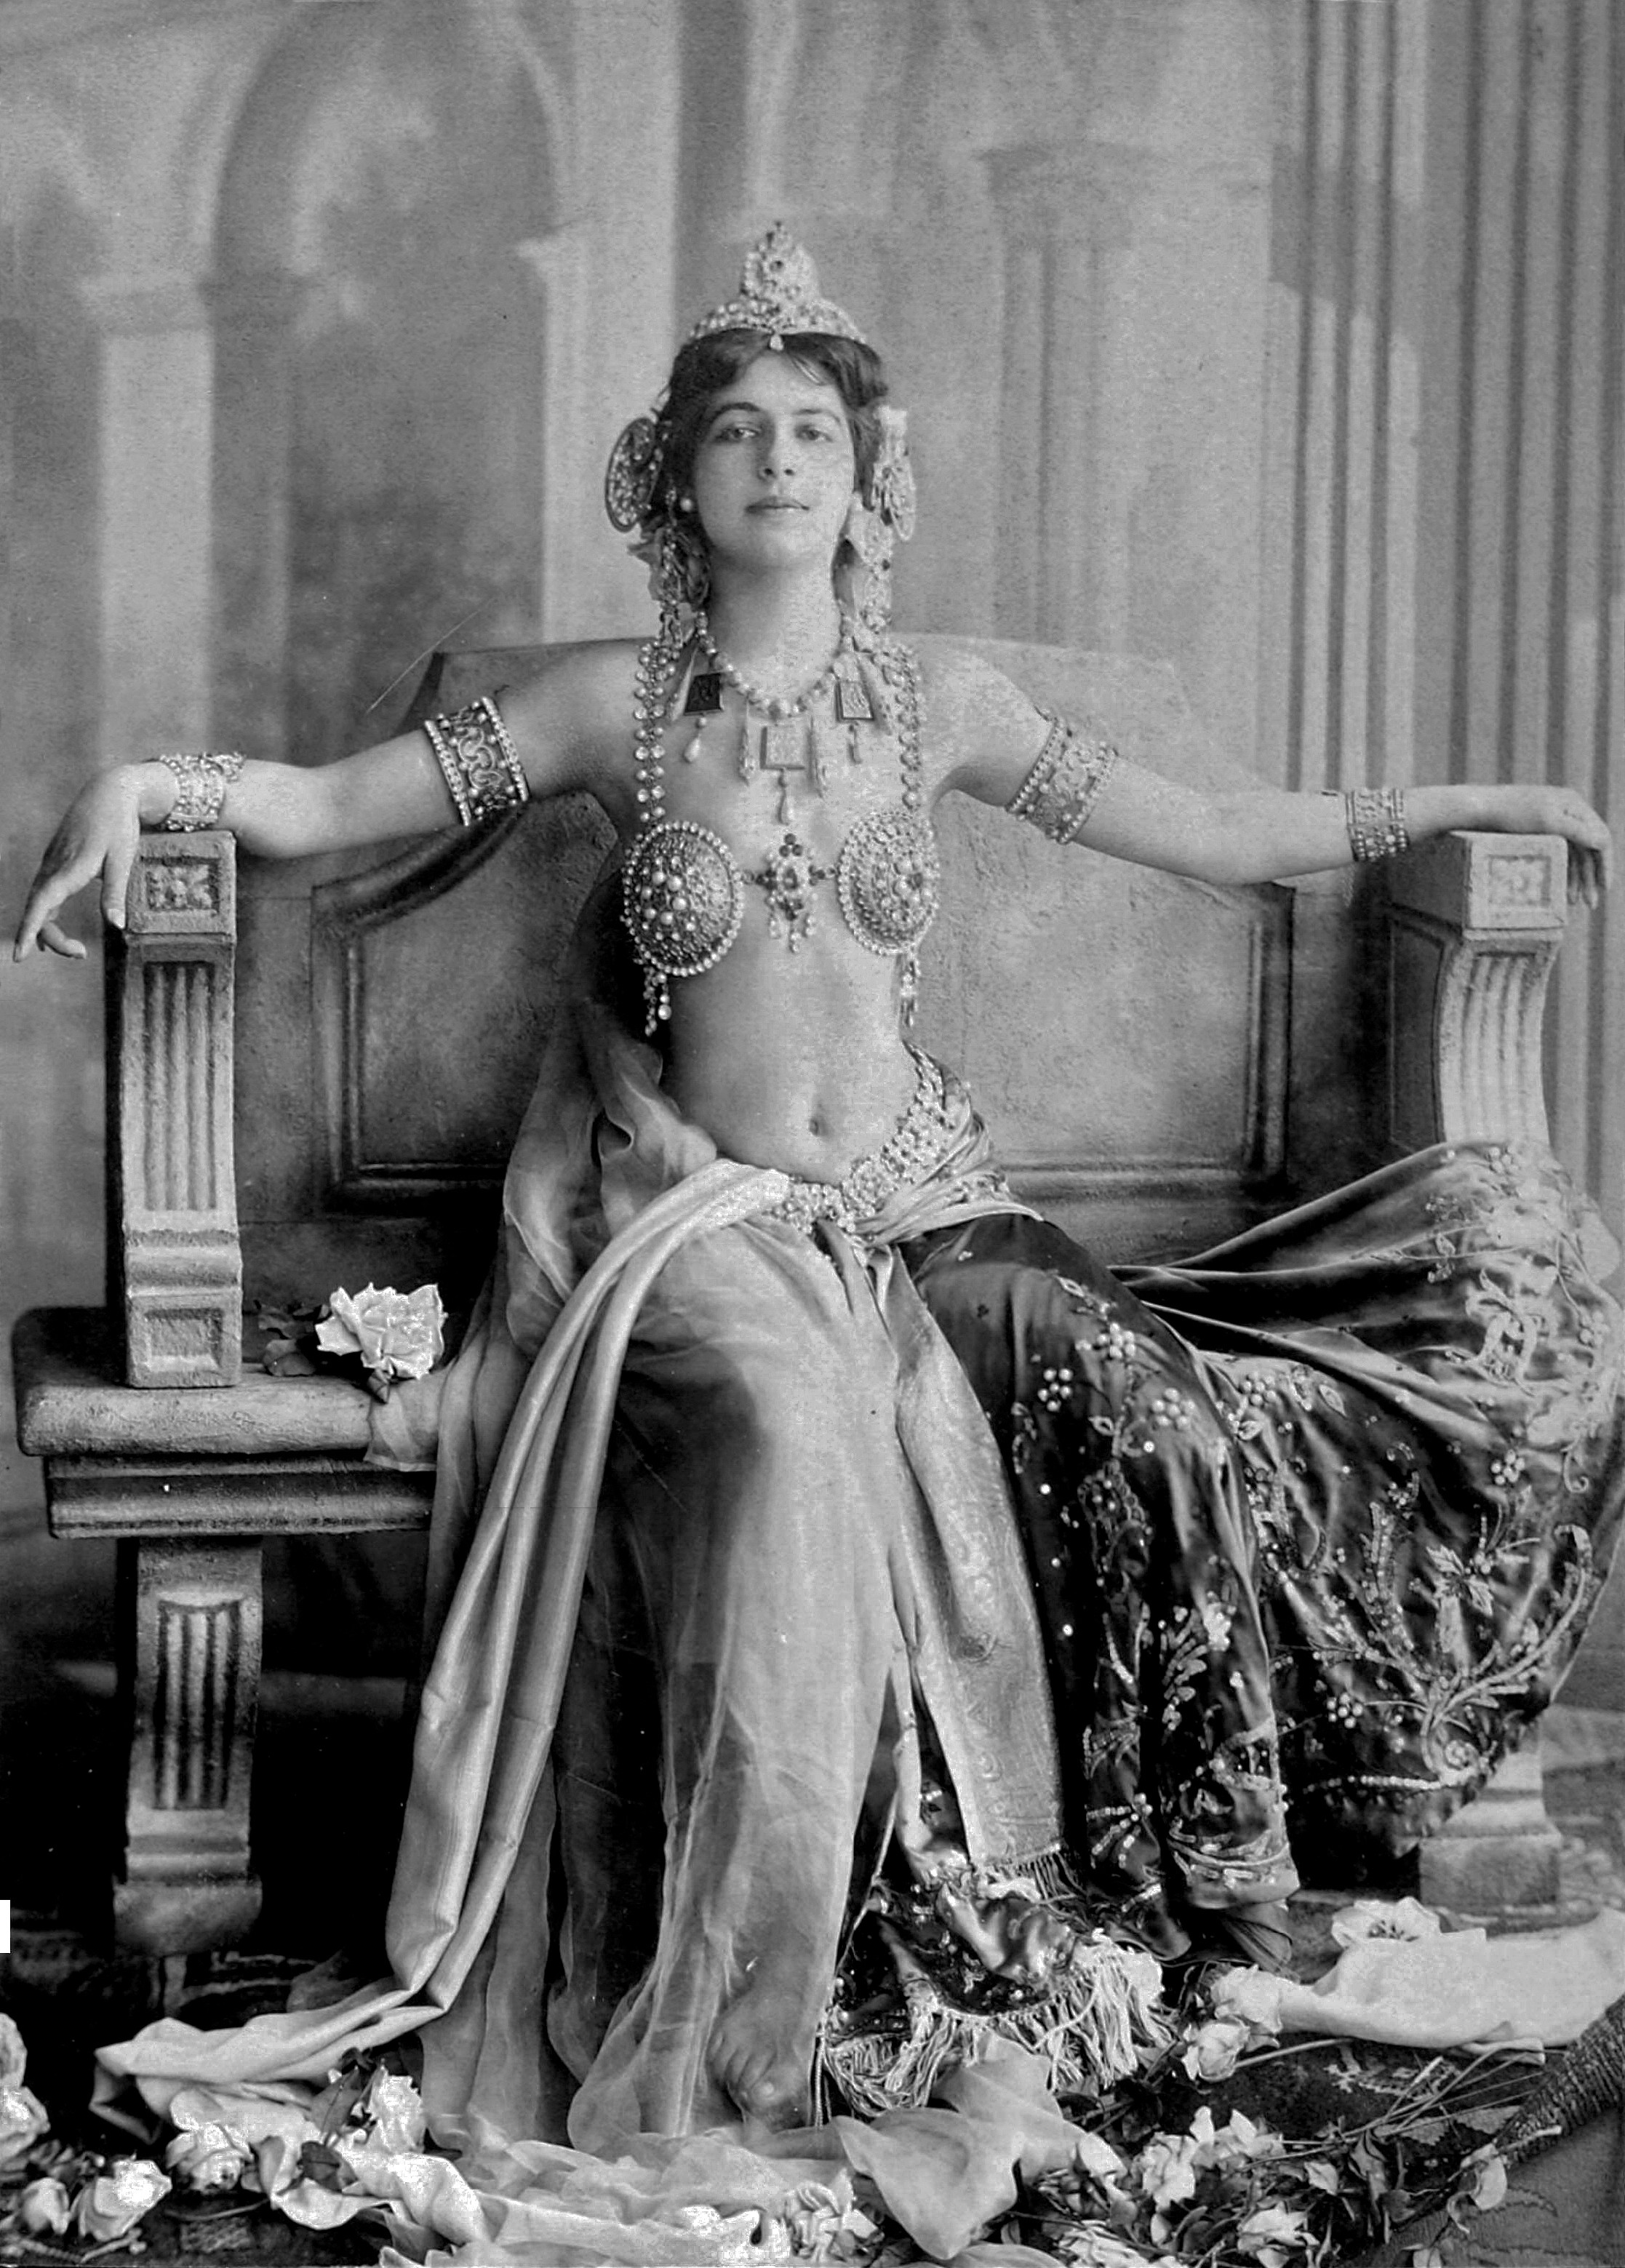 Before her execution by firing squad 100 years ago today, Mata Hari lived an opulent life, hopping from bed to bed in some of the most exclusive hotels Europe had to offer